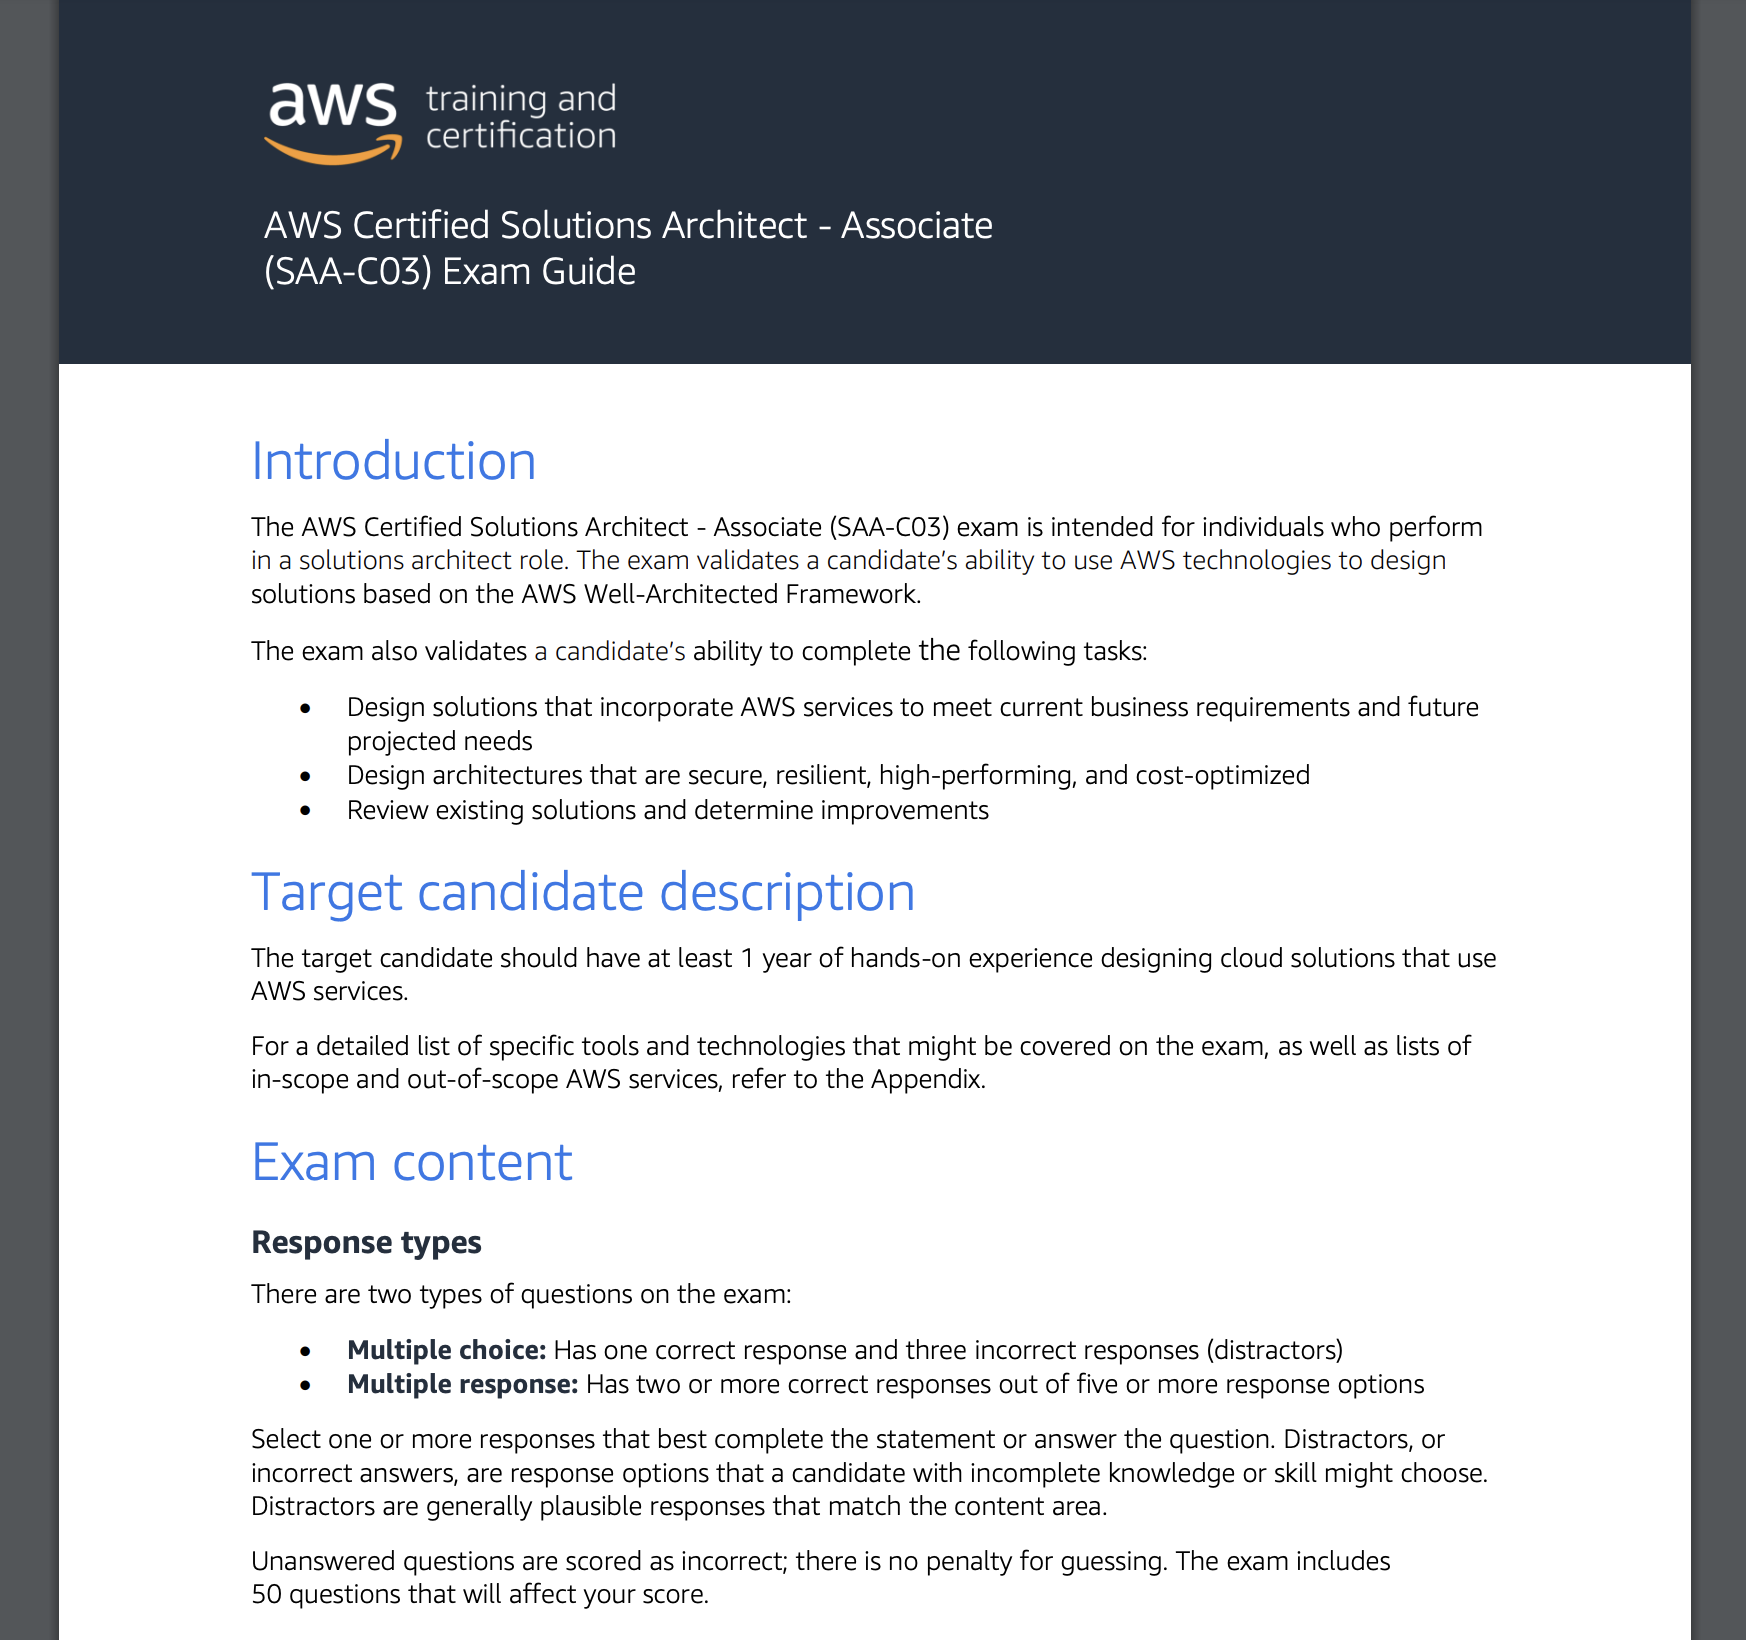 AWS Certified Solutions Architect Associate Exam Guide SAA-C03